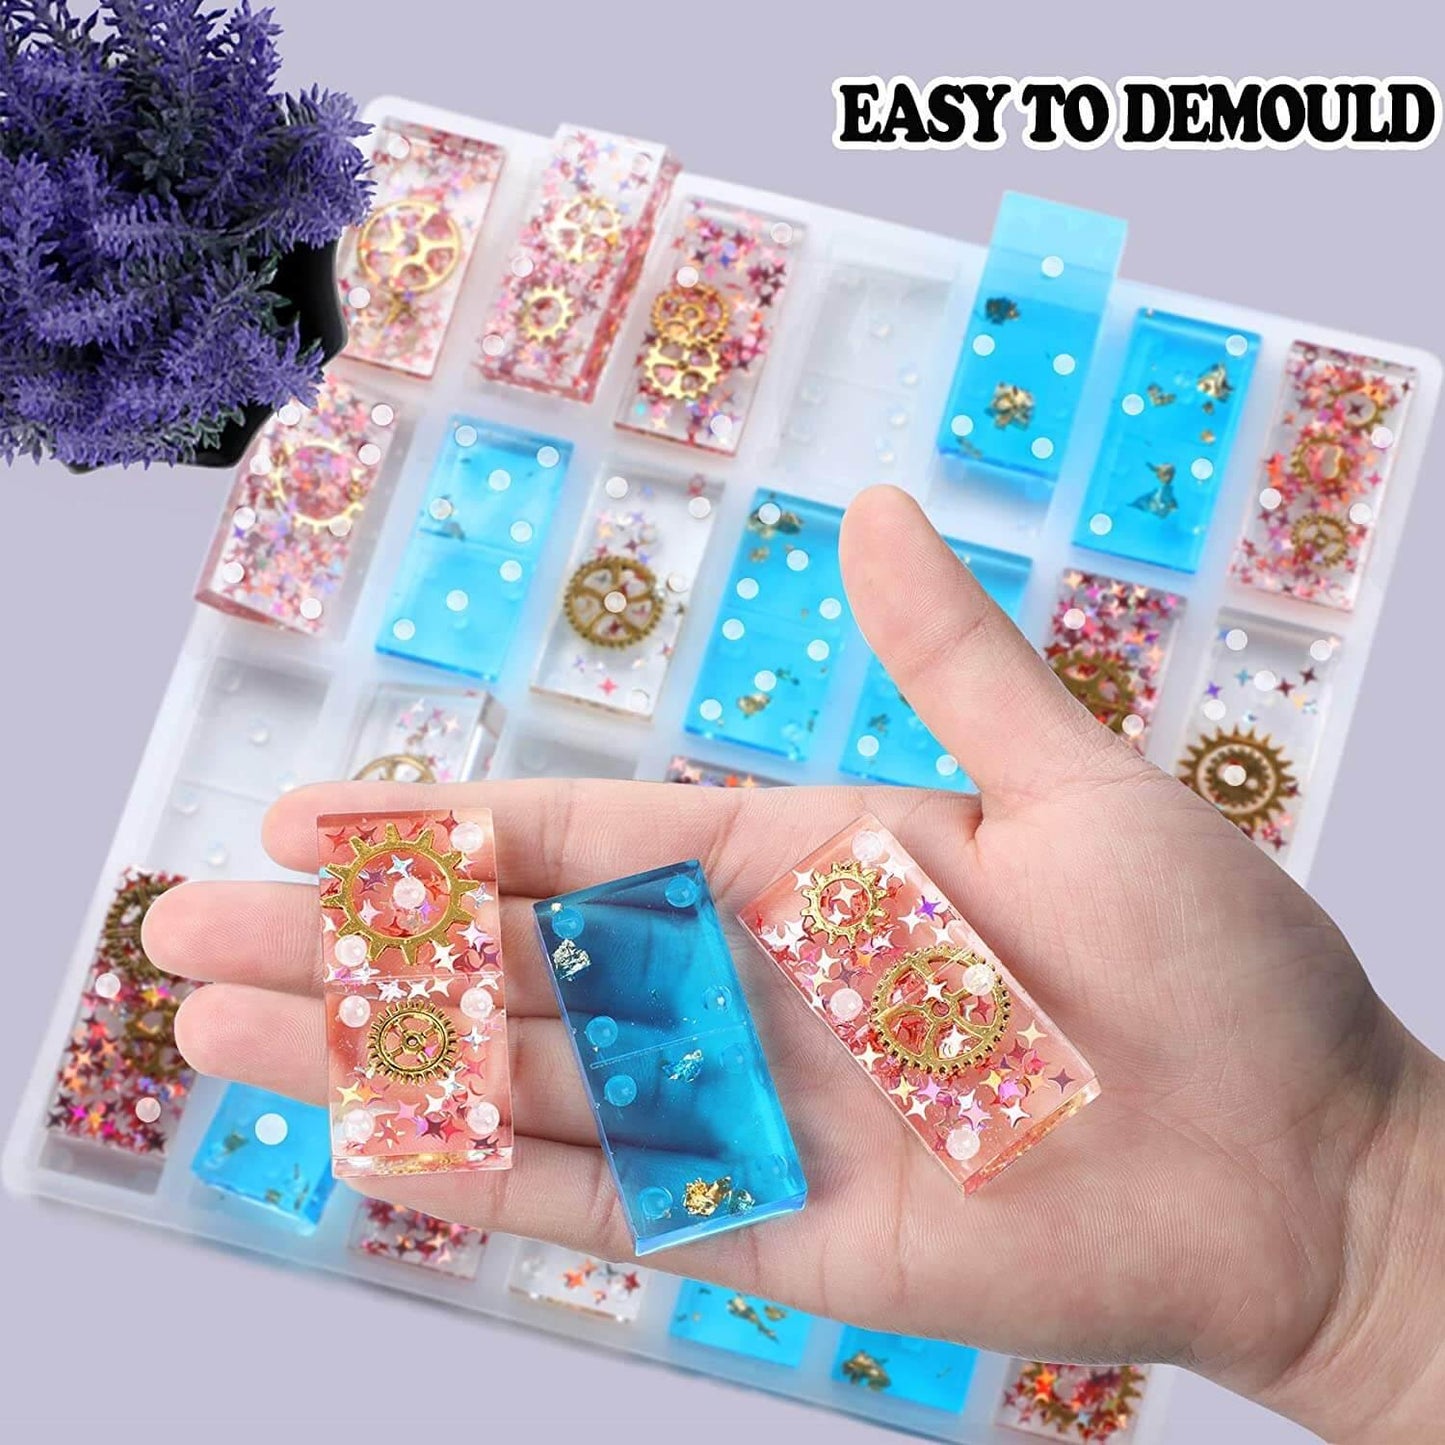 WHOVO Domino Molds for Epoxy Resin Casting, Epoxy Resin Mold for Silicone Domino Game, DIY Silicone Mold for Personalized Domino,Handmade Gift